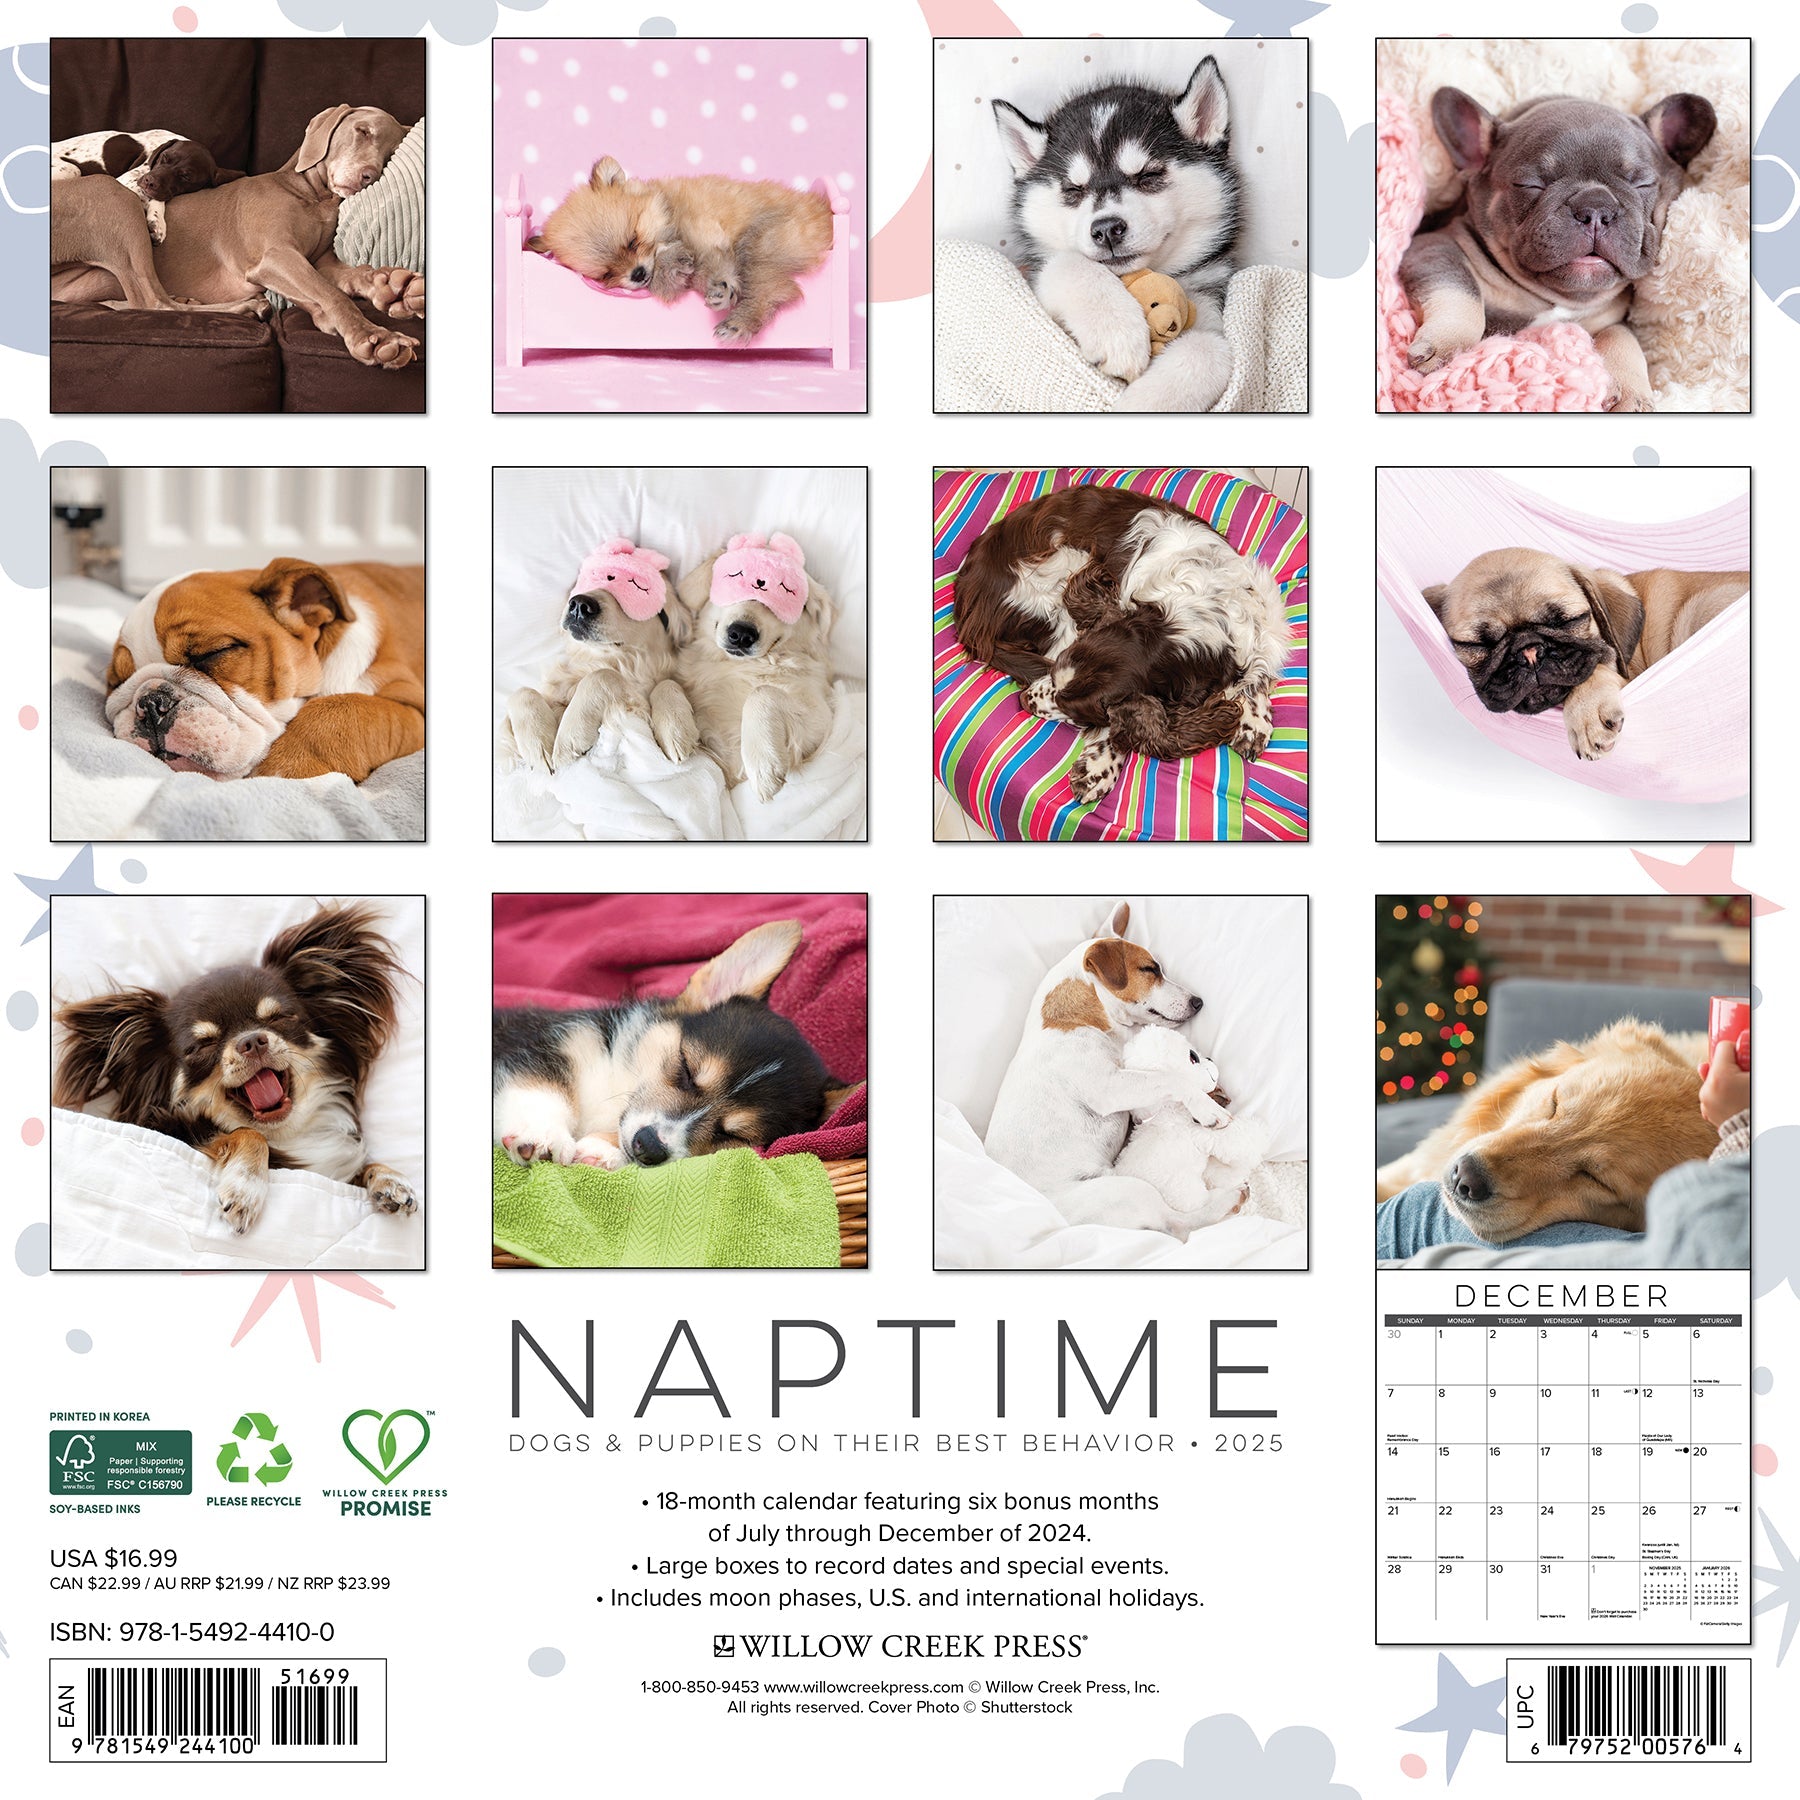 2025 Naptime: Dogs & Puppies on their Best Behavior - Square Wall Calendar